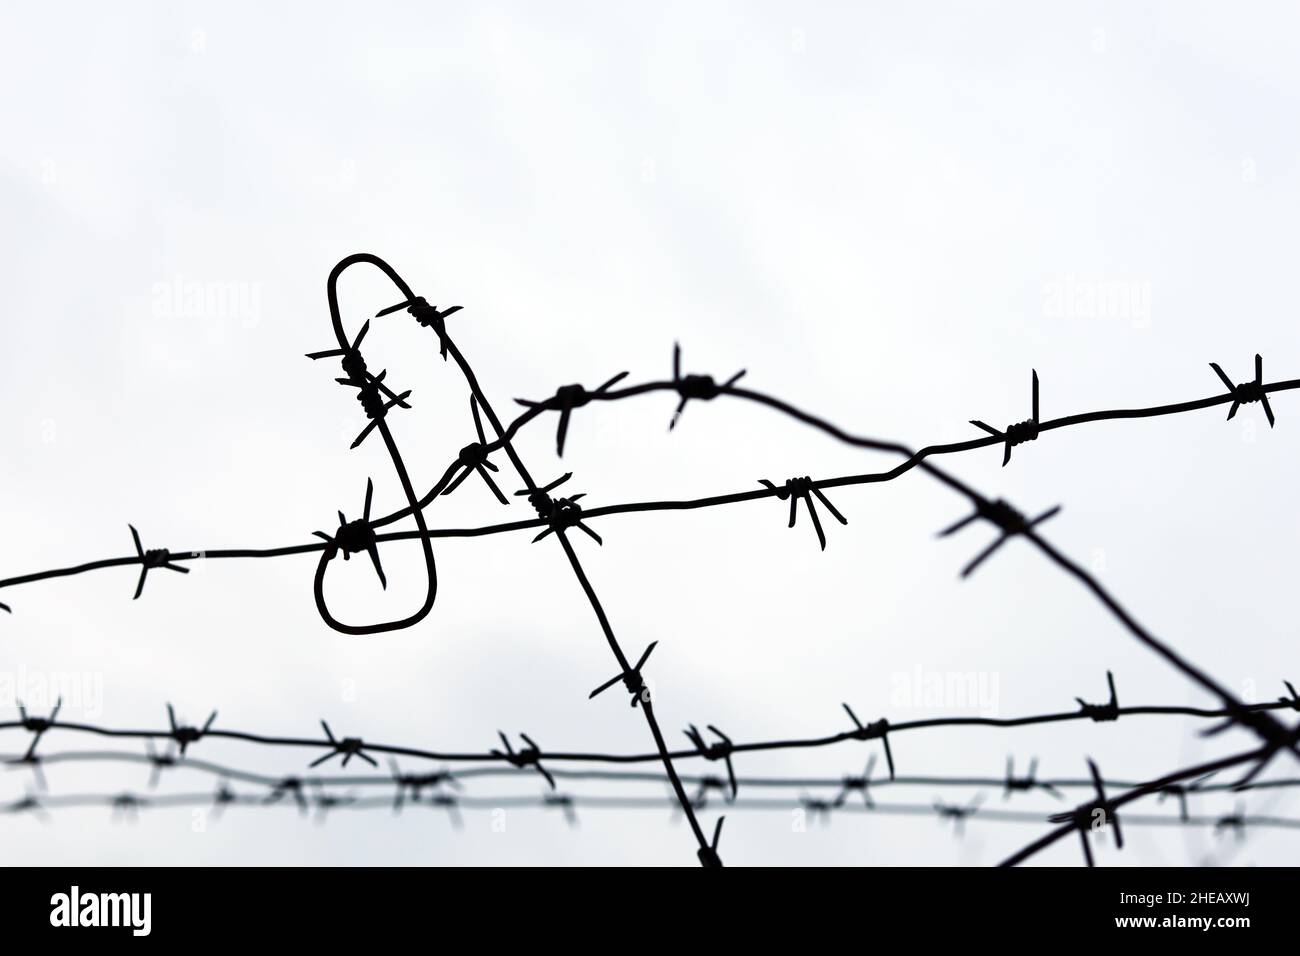 Barbed wire on sky background. Concept of boundary, prison, war or immigration Stock Photo